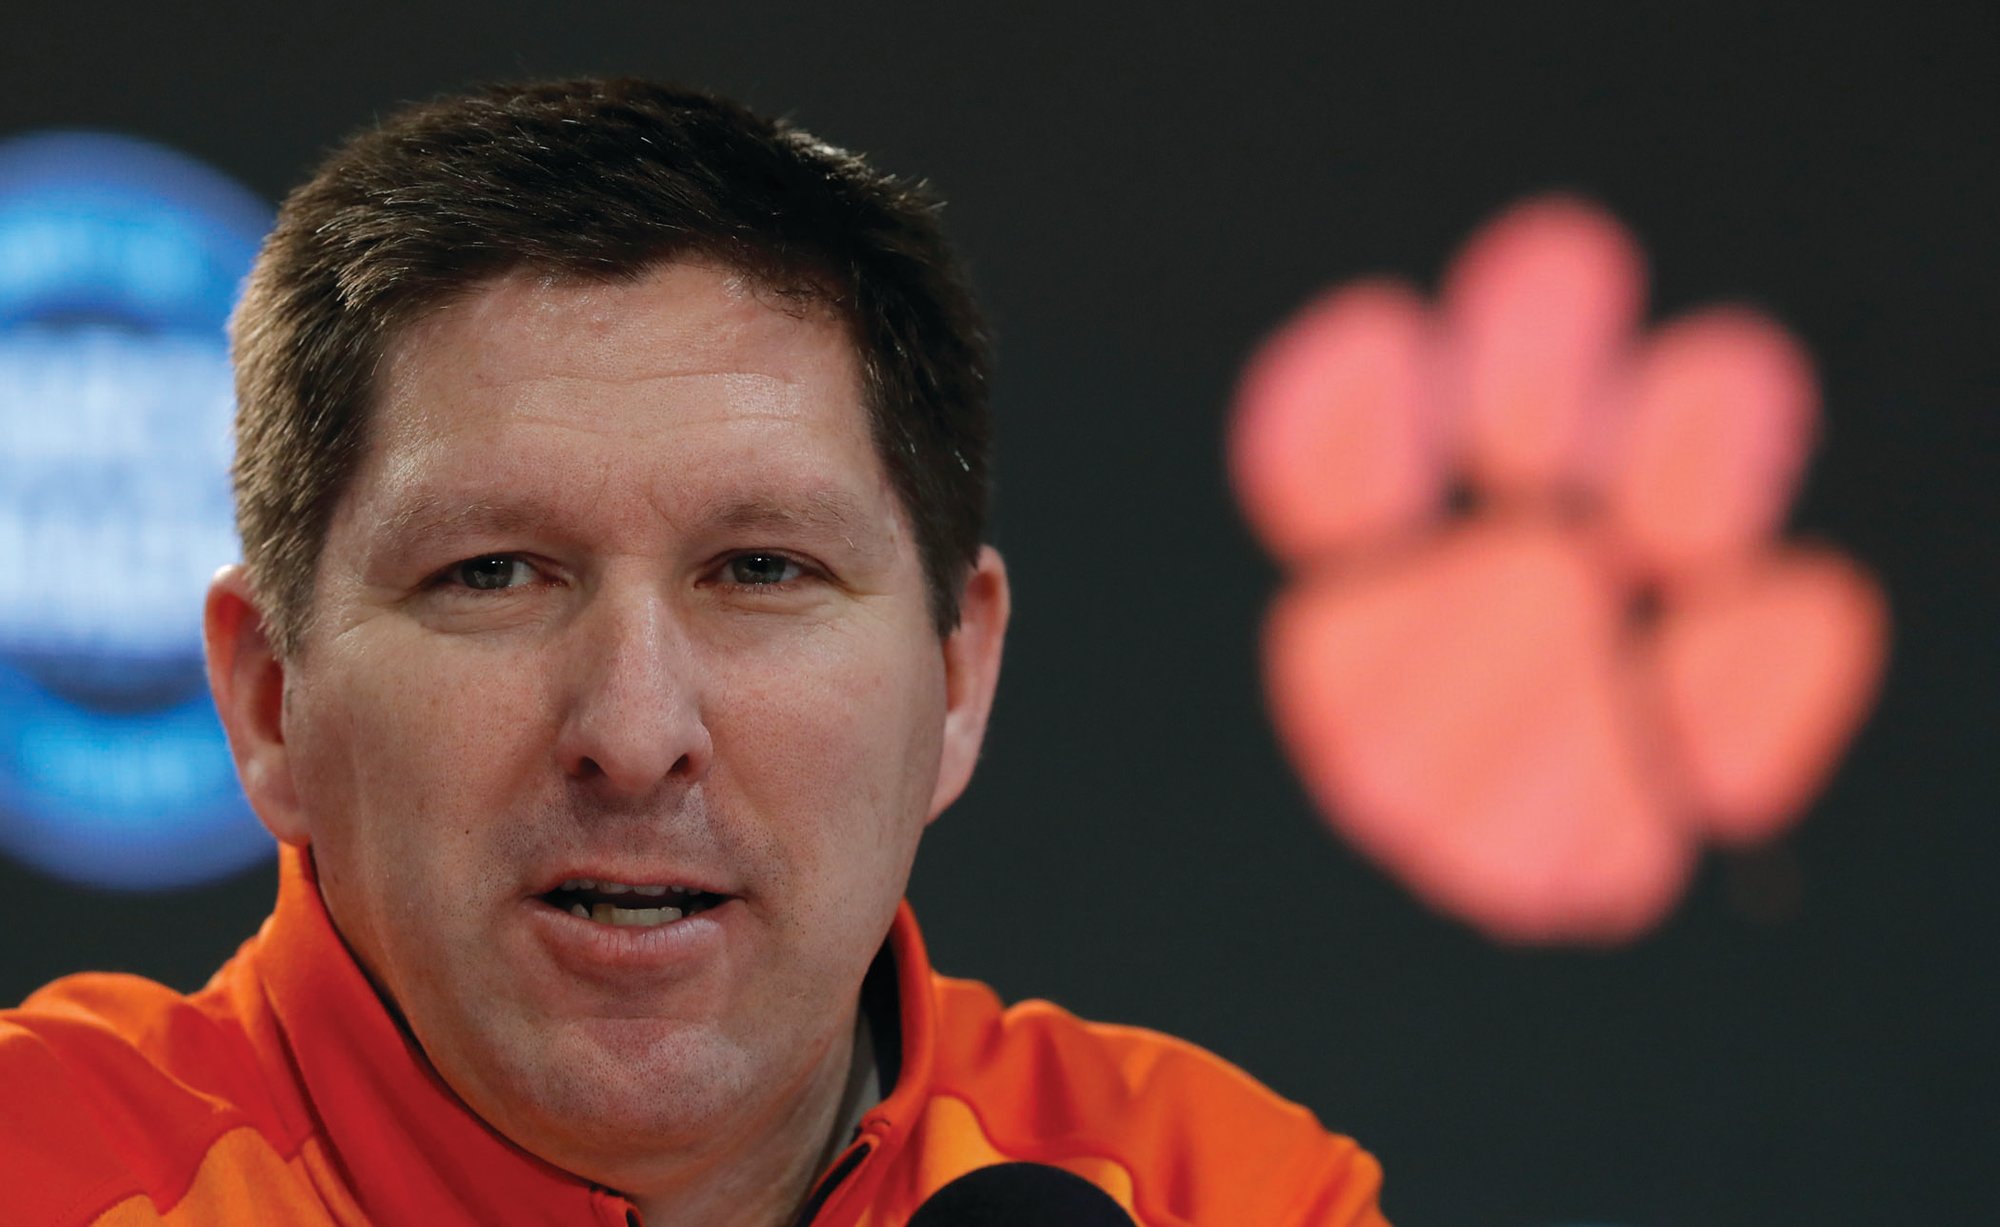 Clemson head coach Brad Brownell speaks during a news conference at the NCAA men's college basketball tournament, Thursday, March 22, 2018, in Omaha, Neb. Clemson faces Kansas in a regional semifinal on Friday.